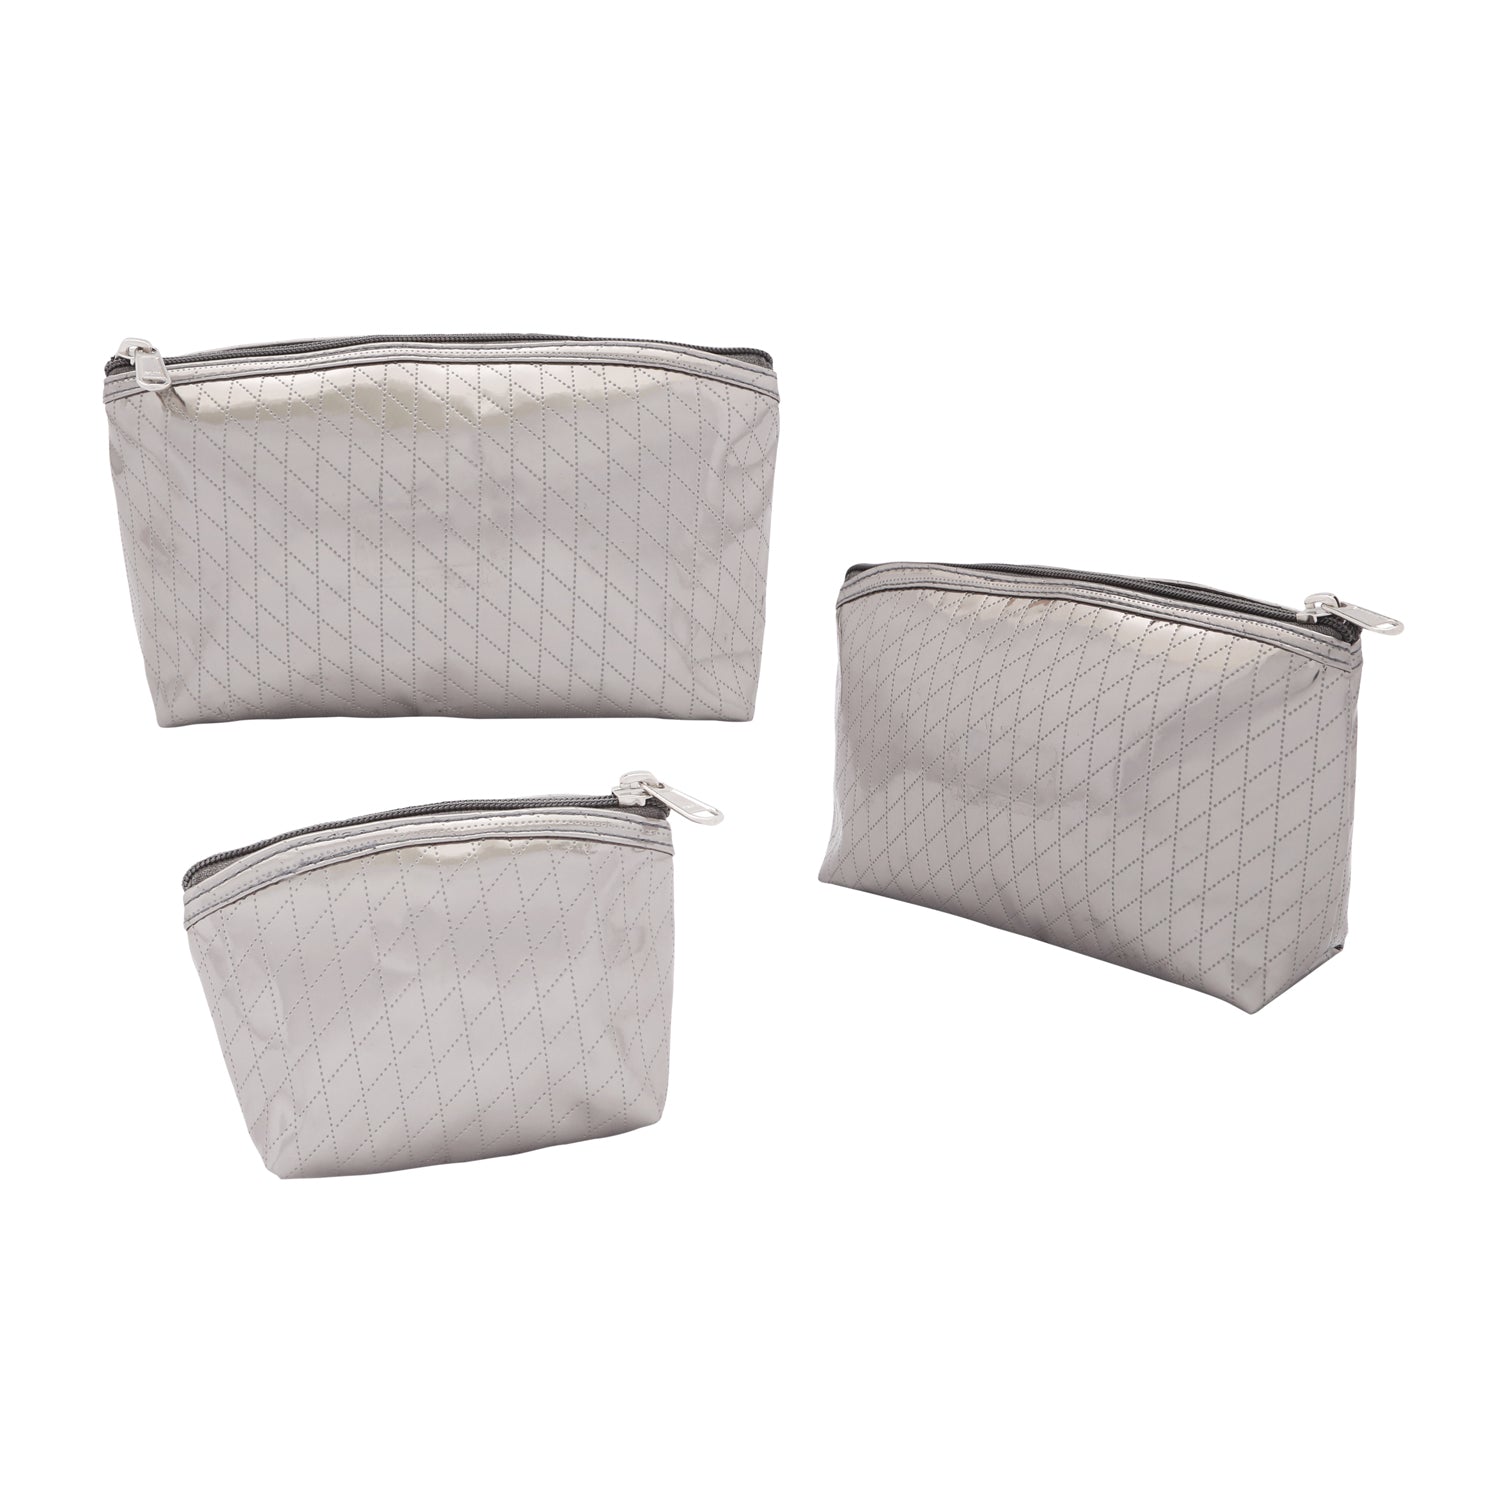 Travel Pouch - Silver Travel Pouches - Set of 3 Pouches